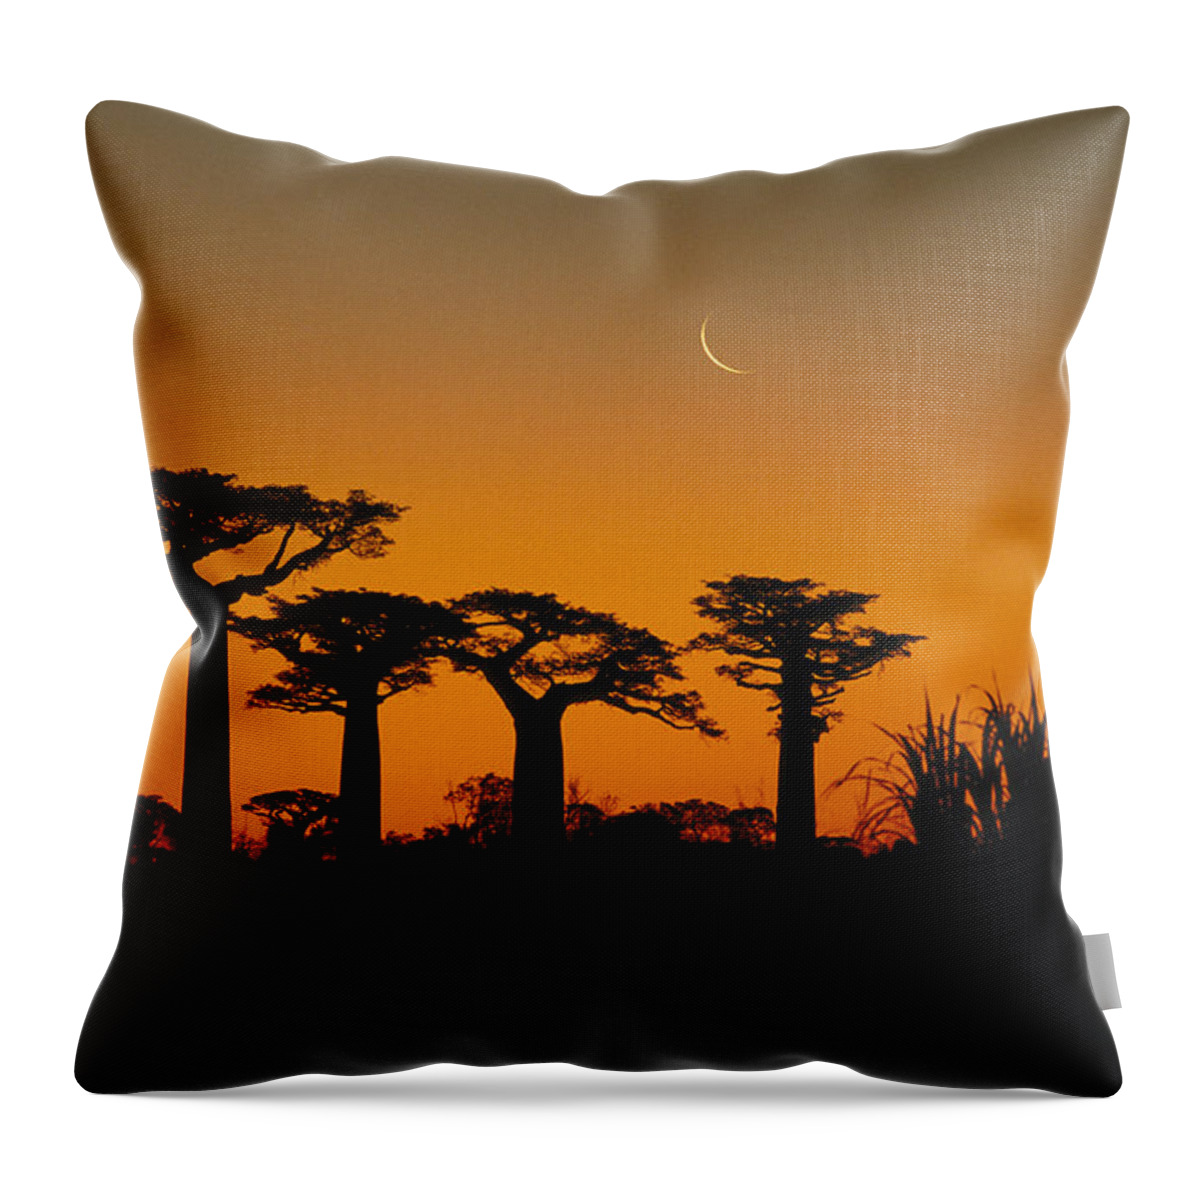 Feb0514 Throw Pillow featuring the photograph Grandidiers Baobab Trees And Moon by Konrad Wothe